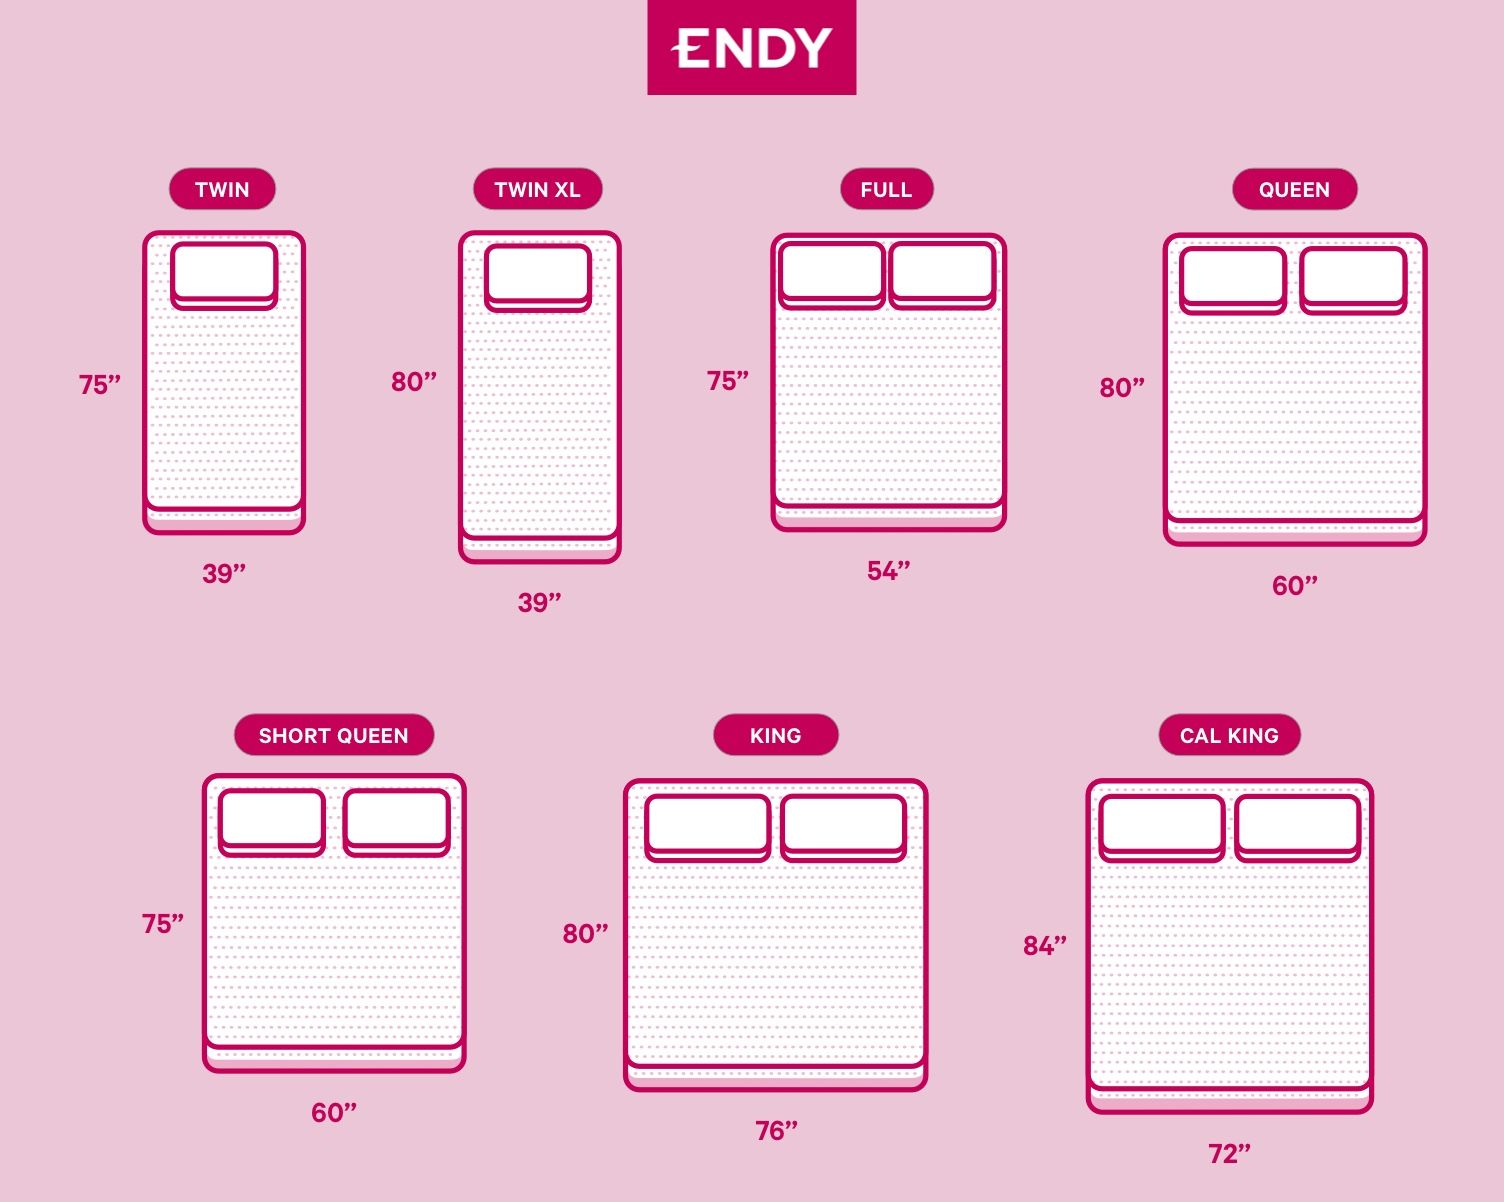 Illustration of the Endy Mattresses size variations with their dimensions noted.